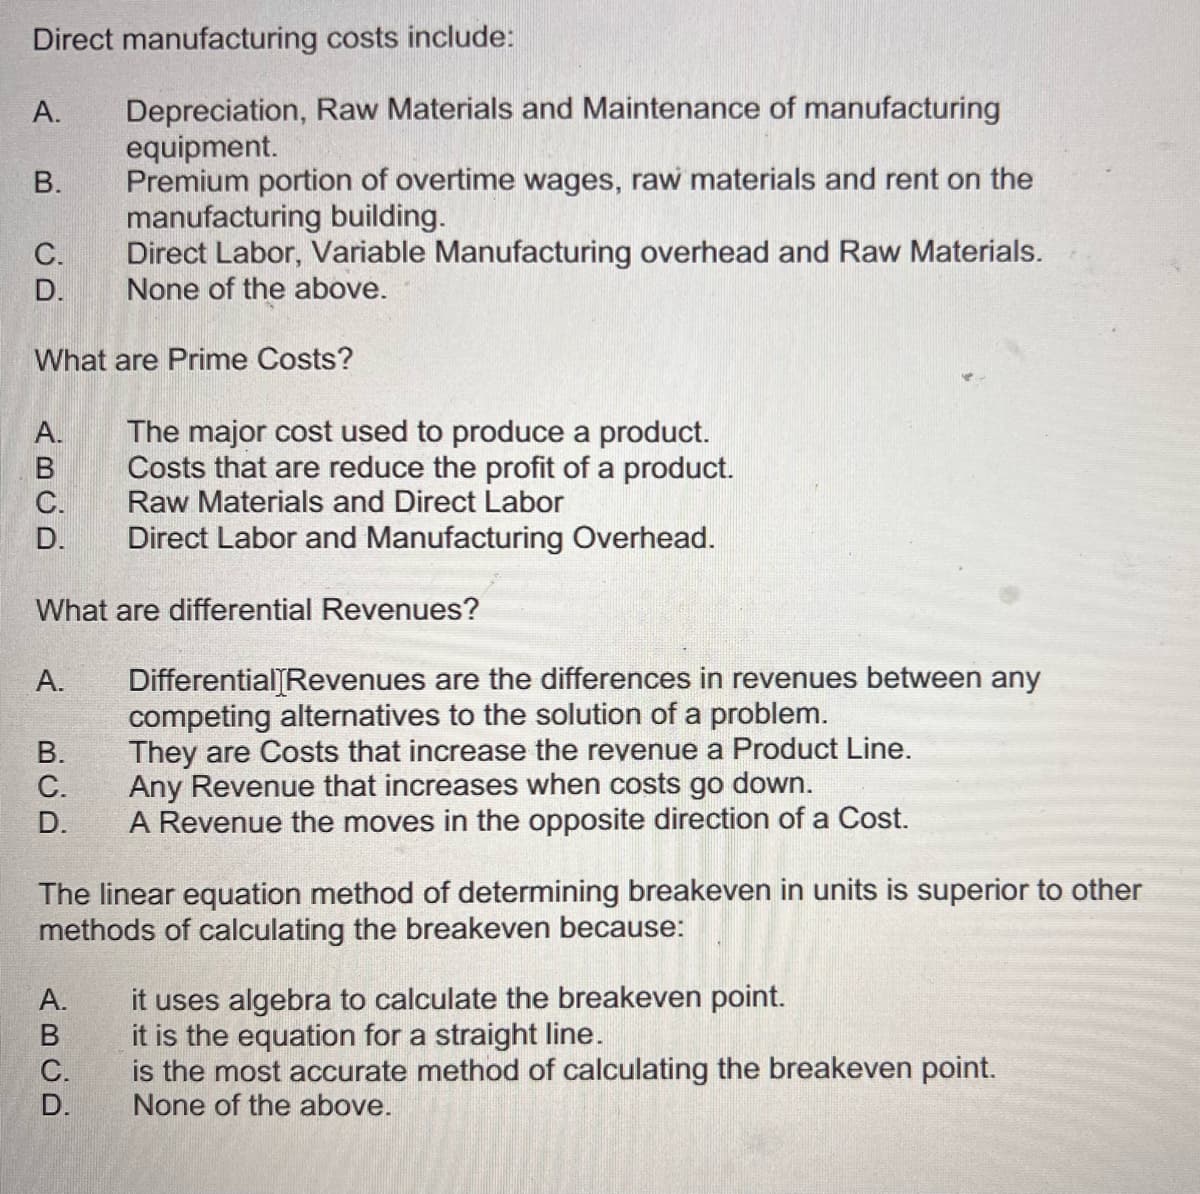 Direct manufacturing costs include:
A.
B.
C.
D.
Depreciation, Raw Materials and Maintenance of manufacturing
equipment.
Premium portion of overtime wages, raw materials and rent on the
manufacturing building.
Direct Labor, Variable Manufacturing overhead and Raw Materials.
None of the above.
What are Prime Costs?
A.
B
C.
D.
The major cost used to produce a product.
Costs that are reduce the profit of a product.
Raw Materials and Direct Labor
Direct Labor and Manufacturing Overhead.
What are differential Revenues?
A.
B.
C.
D.
Differential Revenues are the differences in revenues between any
competing alternatives to the solution of a problem.
They are Costs that increase the revenue a Product Line.
Any Revenue that increases when costs go down.
A Revenue the moves in the opposite direction of a Cost.
The linear equation method of determining breakeven in units is superior to other
methods of calculating the breakeven because:
A.
ABCD
C.
D.
it uses algebra to calculate the breakeven point.
it is the equation for a straight line.
is the most accurate method of calculating the breakeven point.
None of the above.